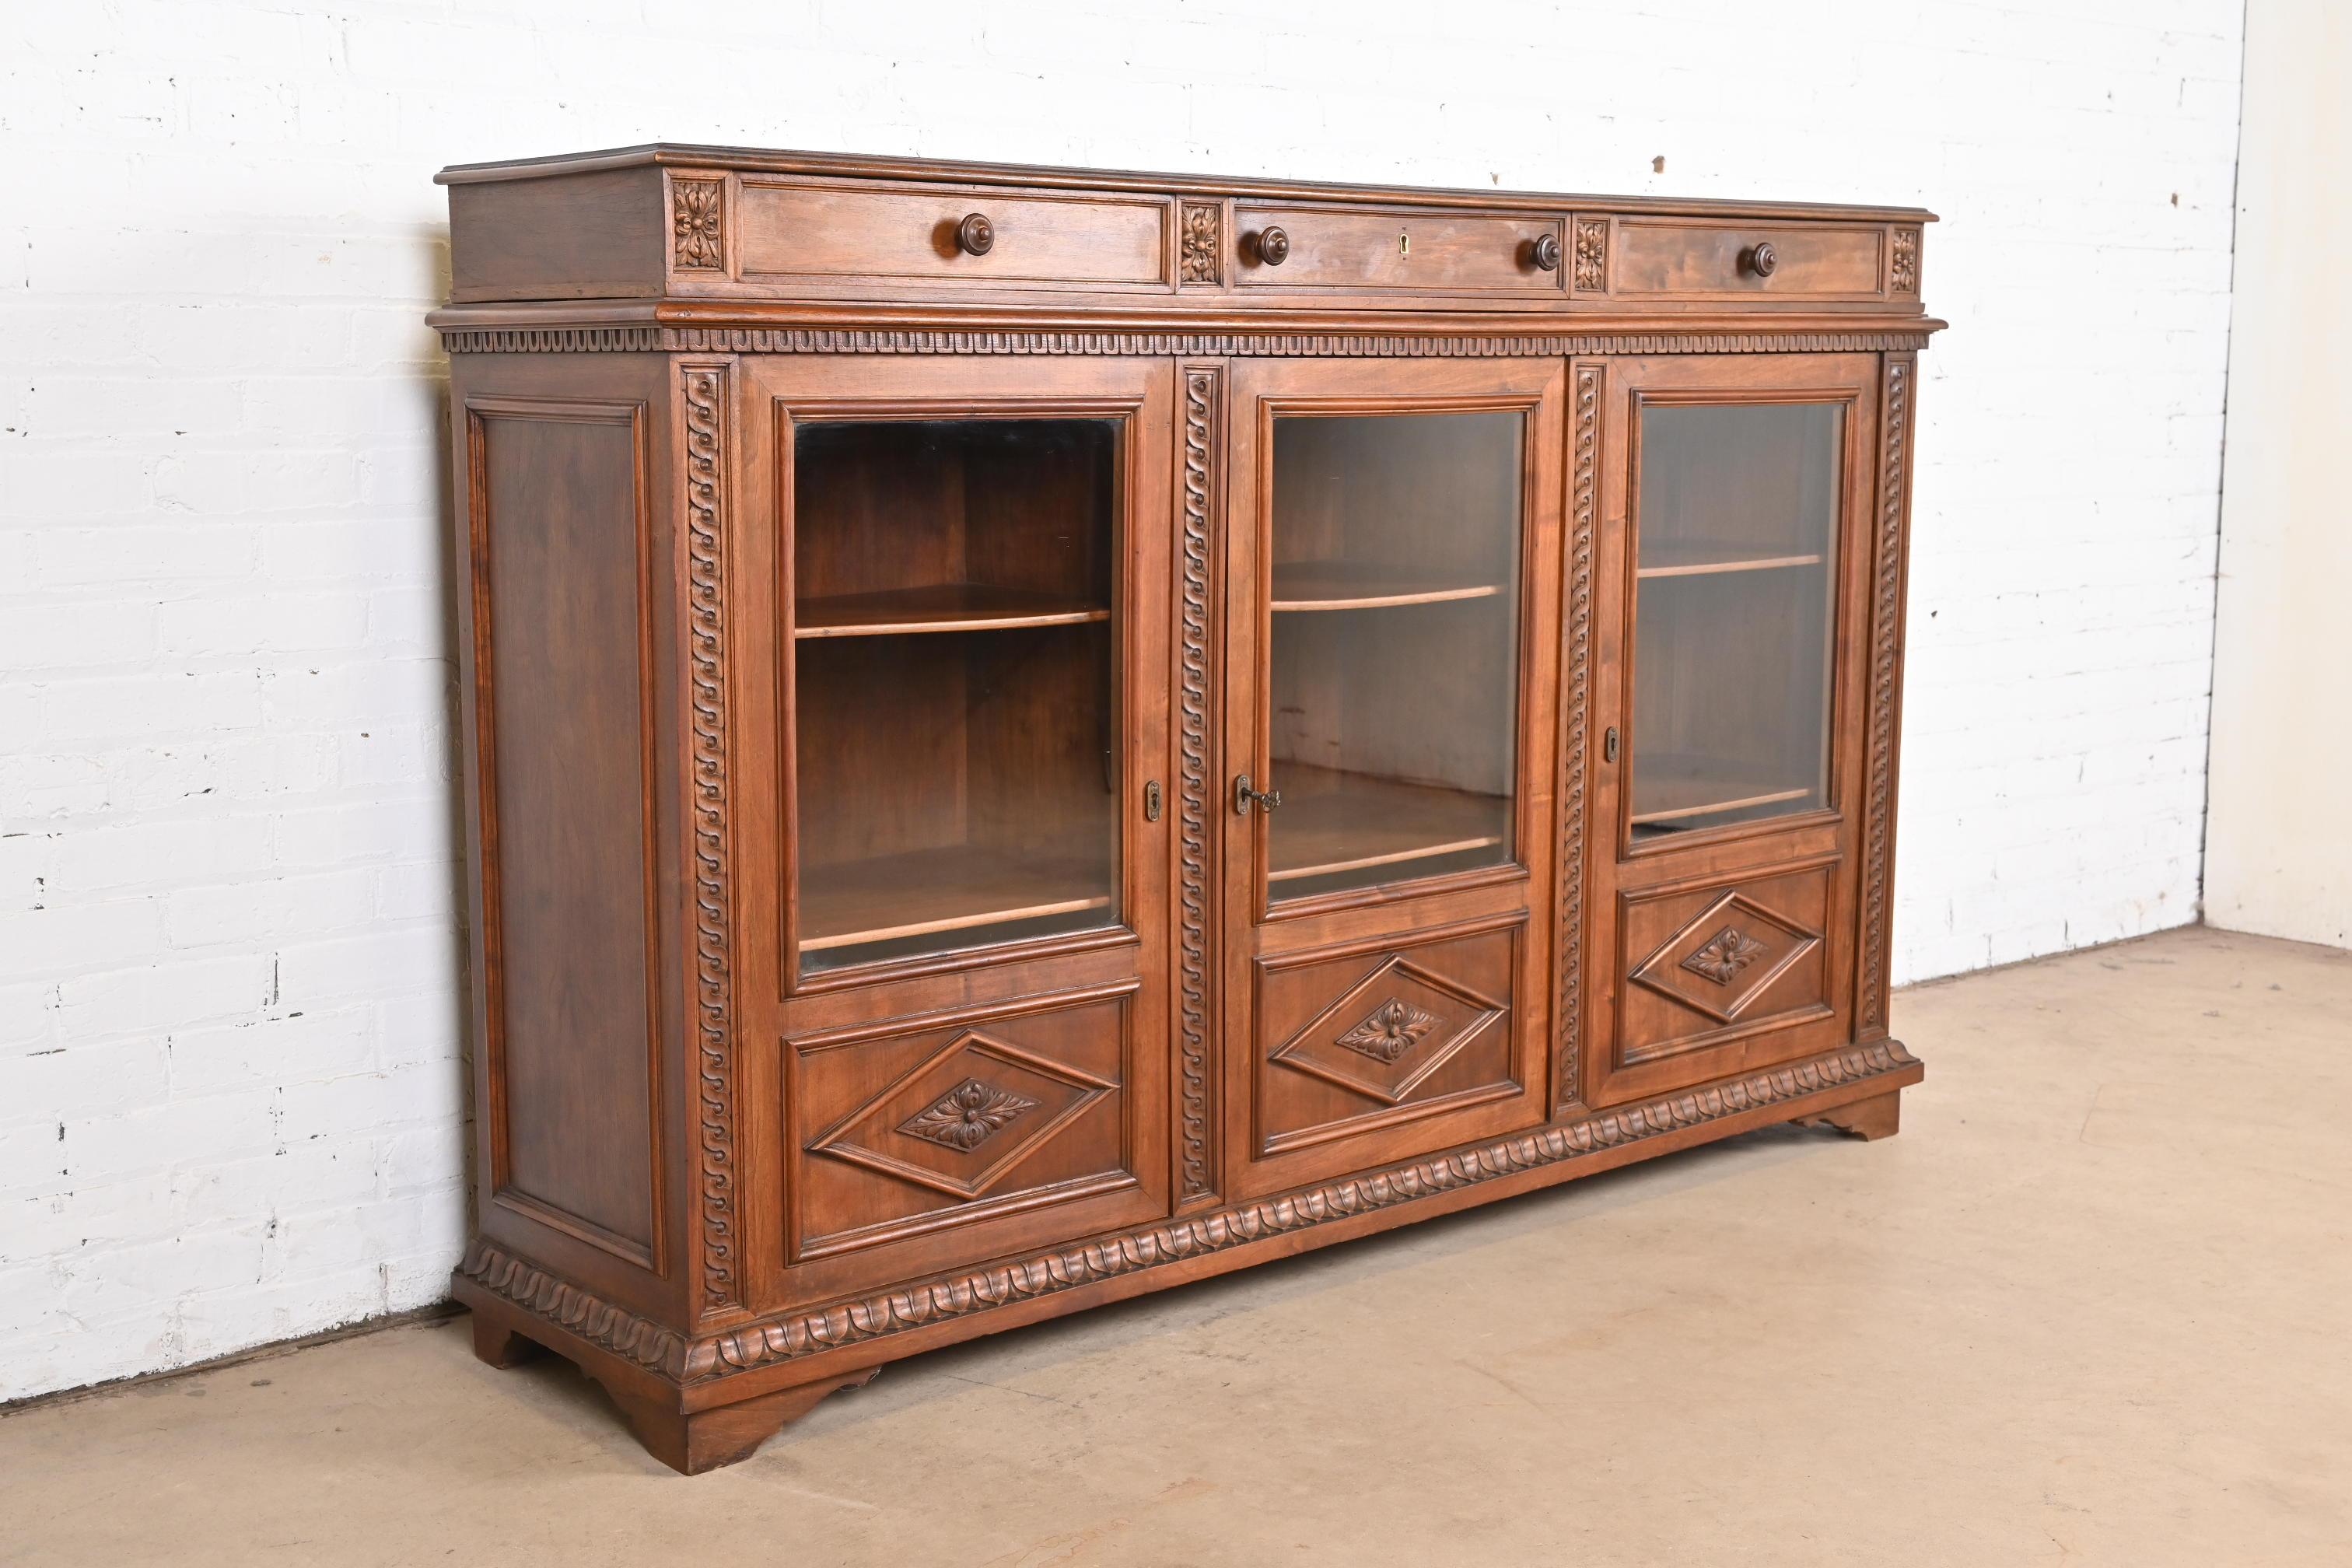 An outstanding antique Victorian or Renaissance Revival triple bookcase cabinet

In the manner of R.J. Horner

USA, Circa 1890s

Carved walnut, with glass front doors and brass hardware. Key is included.

Measures: 71.5